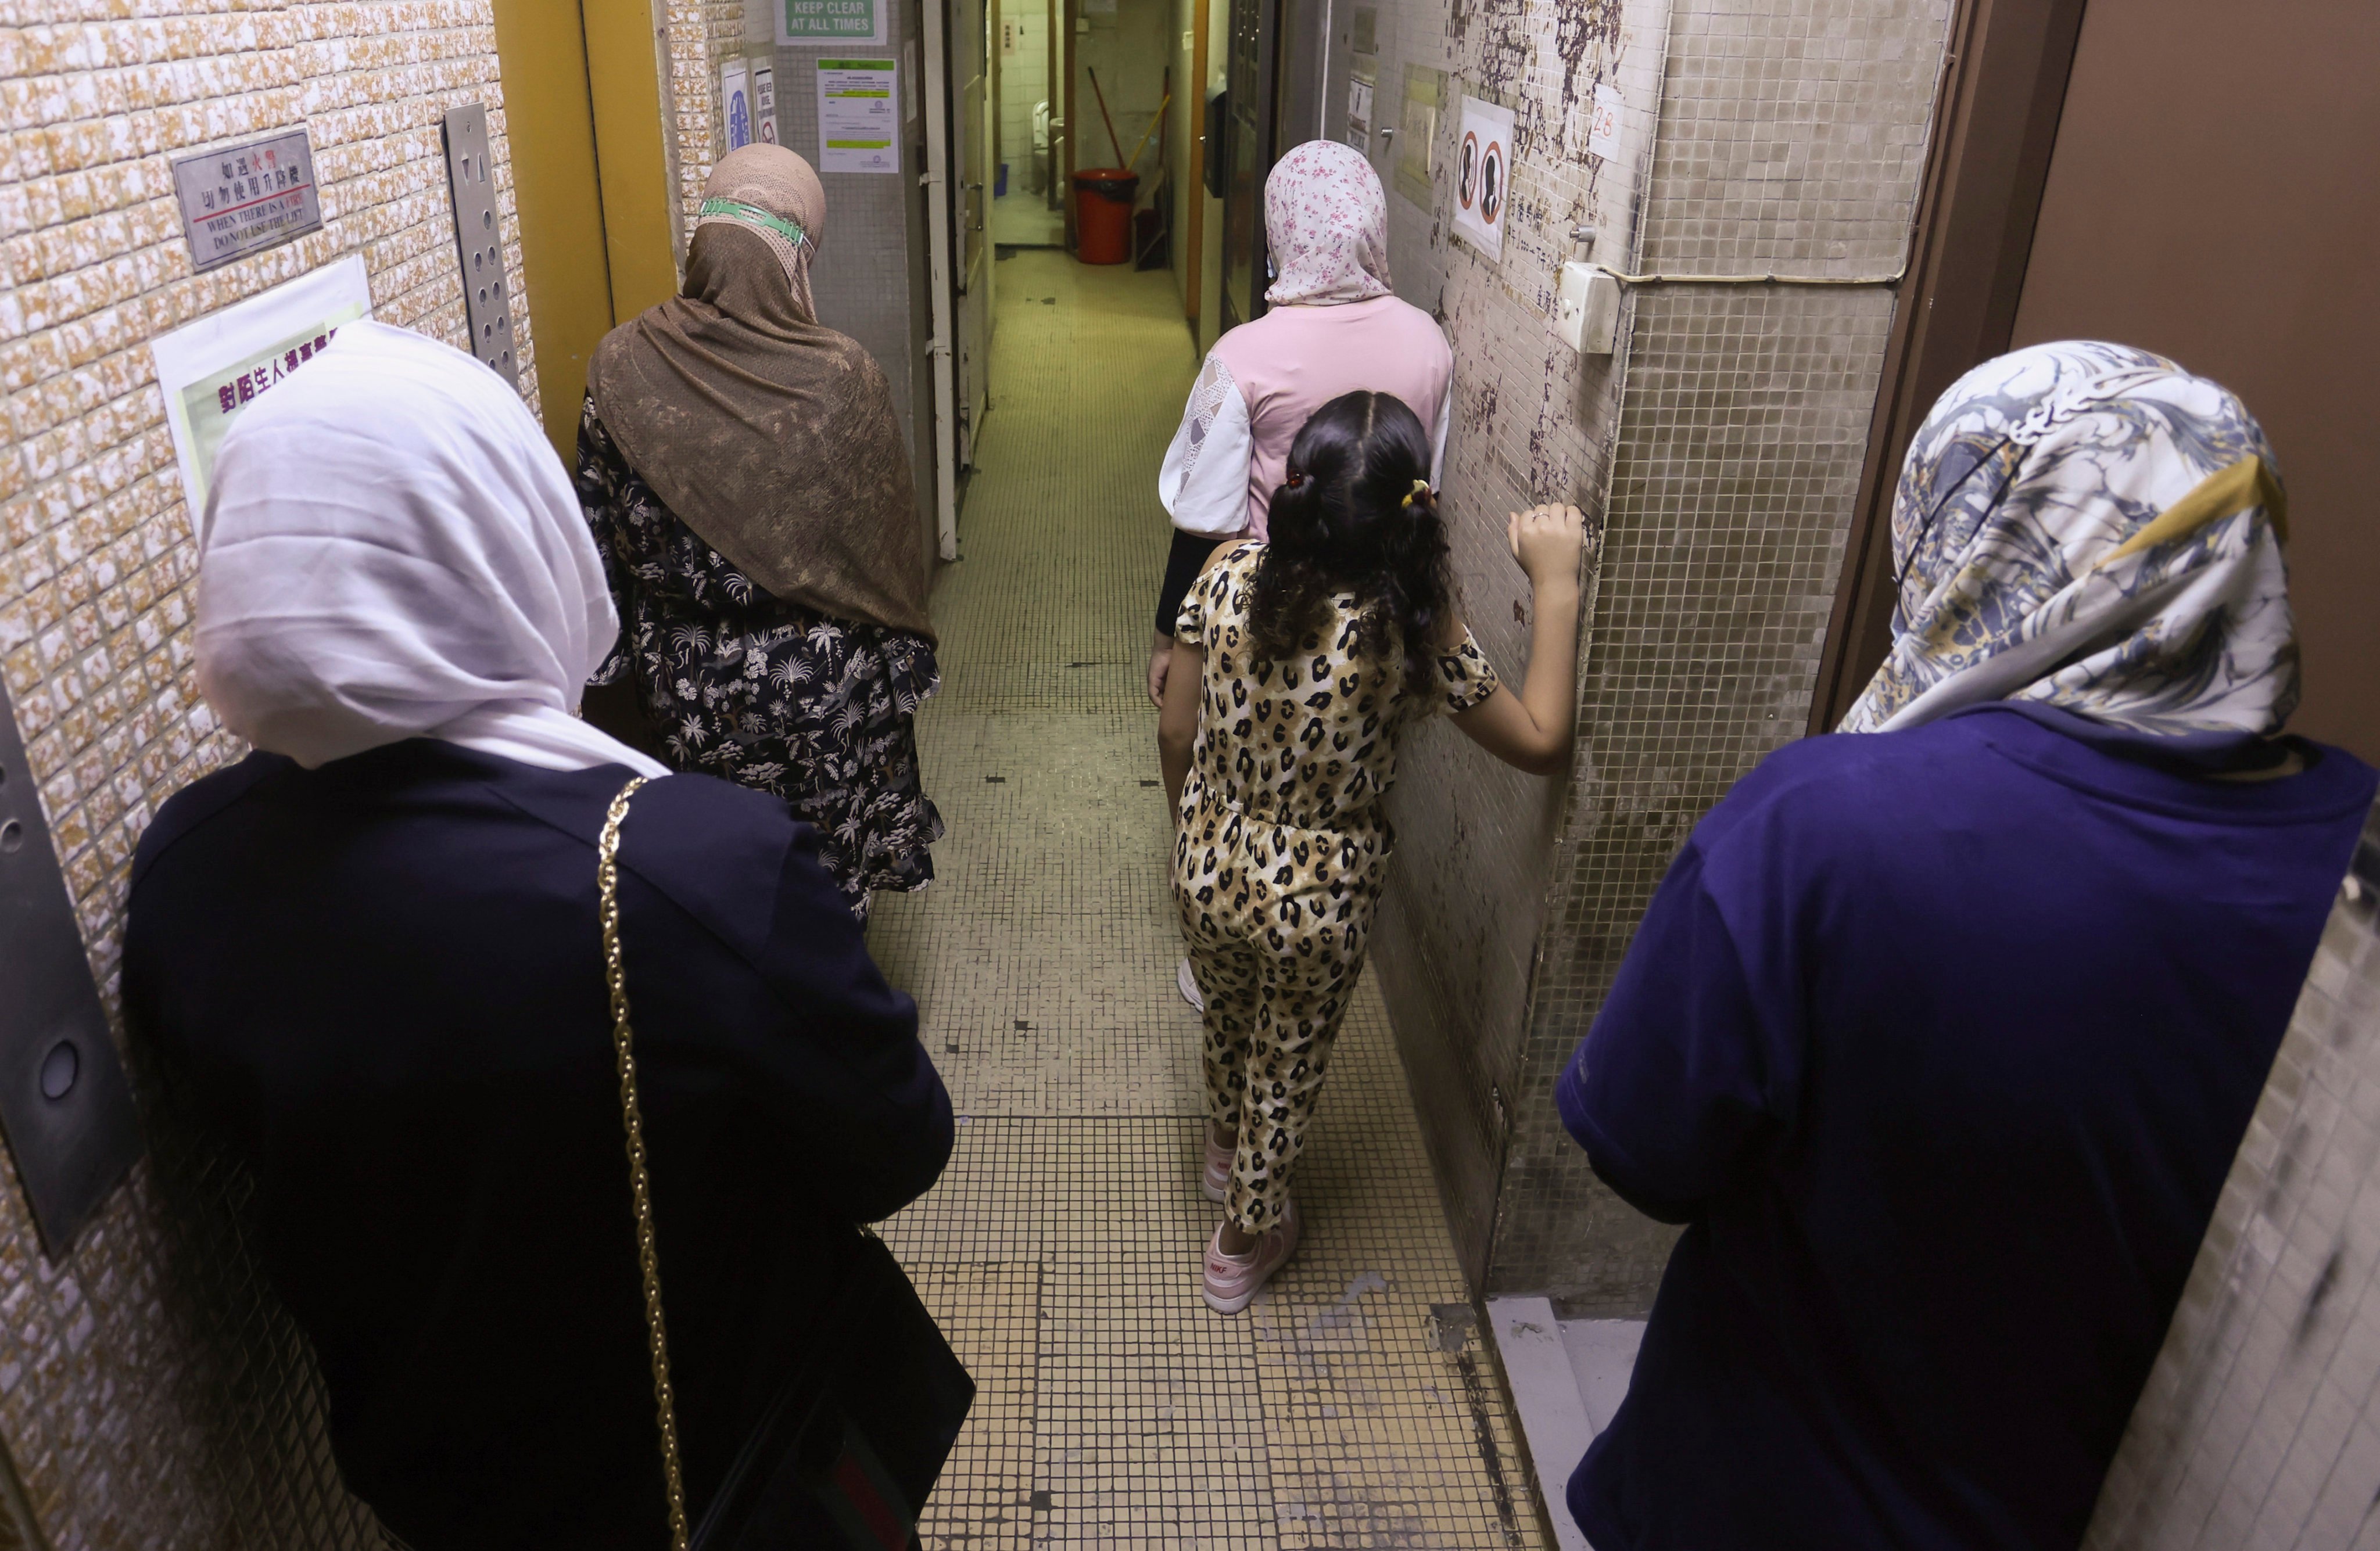 The Amer family from Egypt is struggling to survive in Hong Kong. Photo: Jonathan Wong